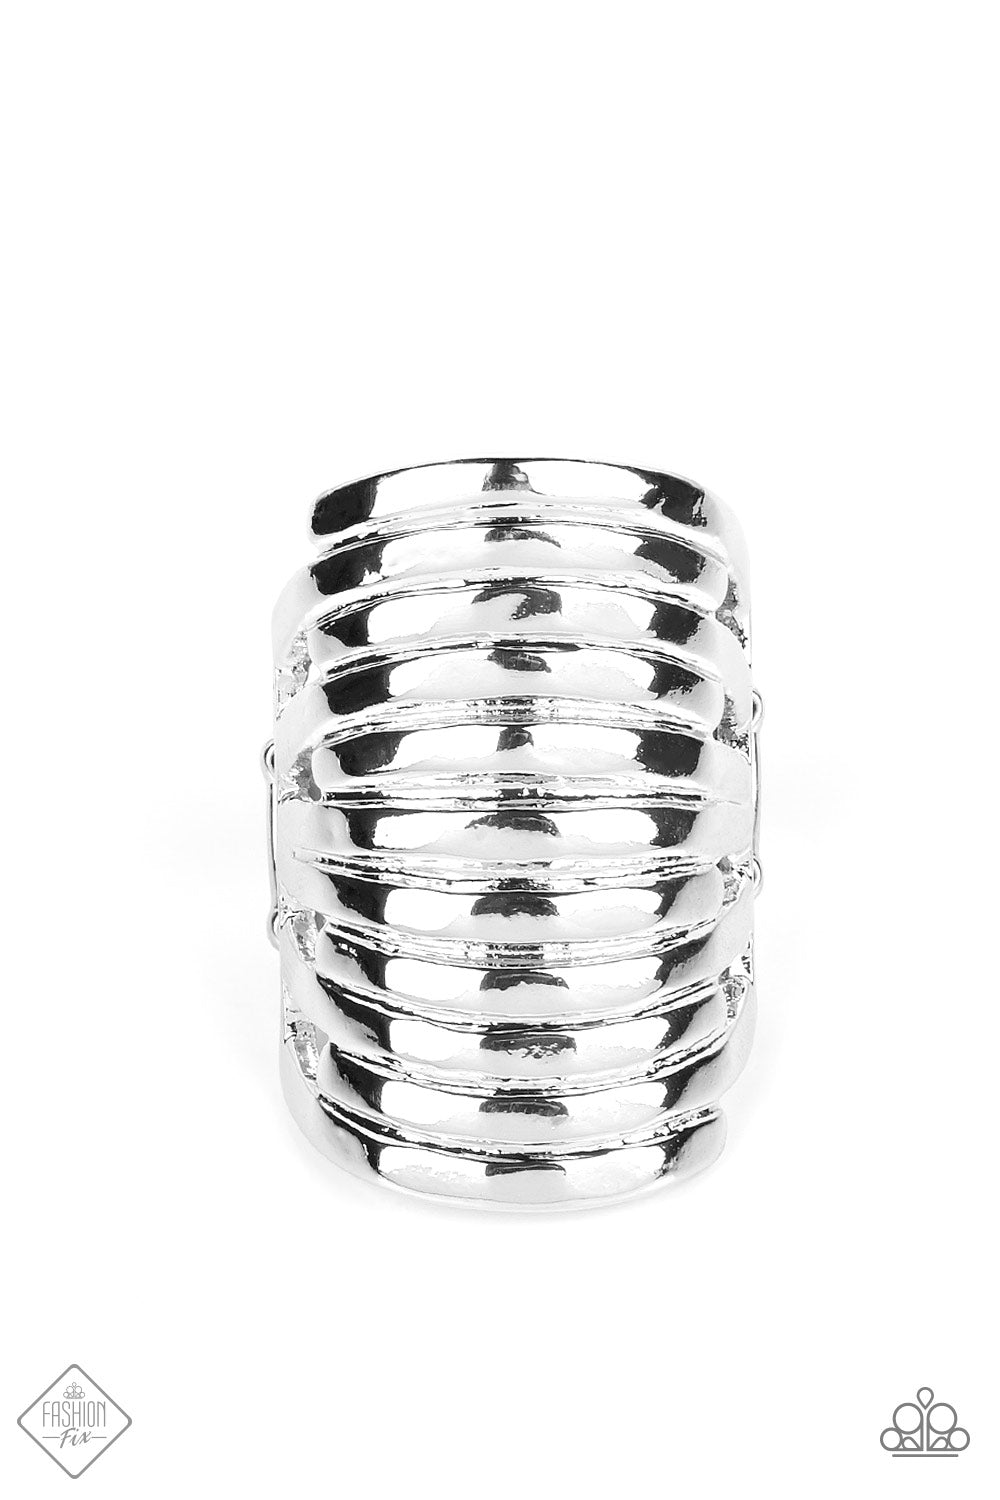 silver, silver jewlery, ring, fat back, affordable jewelry, affordable holiday gift, everyday jewelry, trending jewelry, viral jewelry, fashion fix exclusive, paparazzi accessories, jewelry stores, jewelry stores near me,